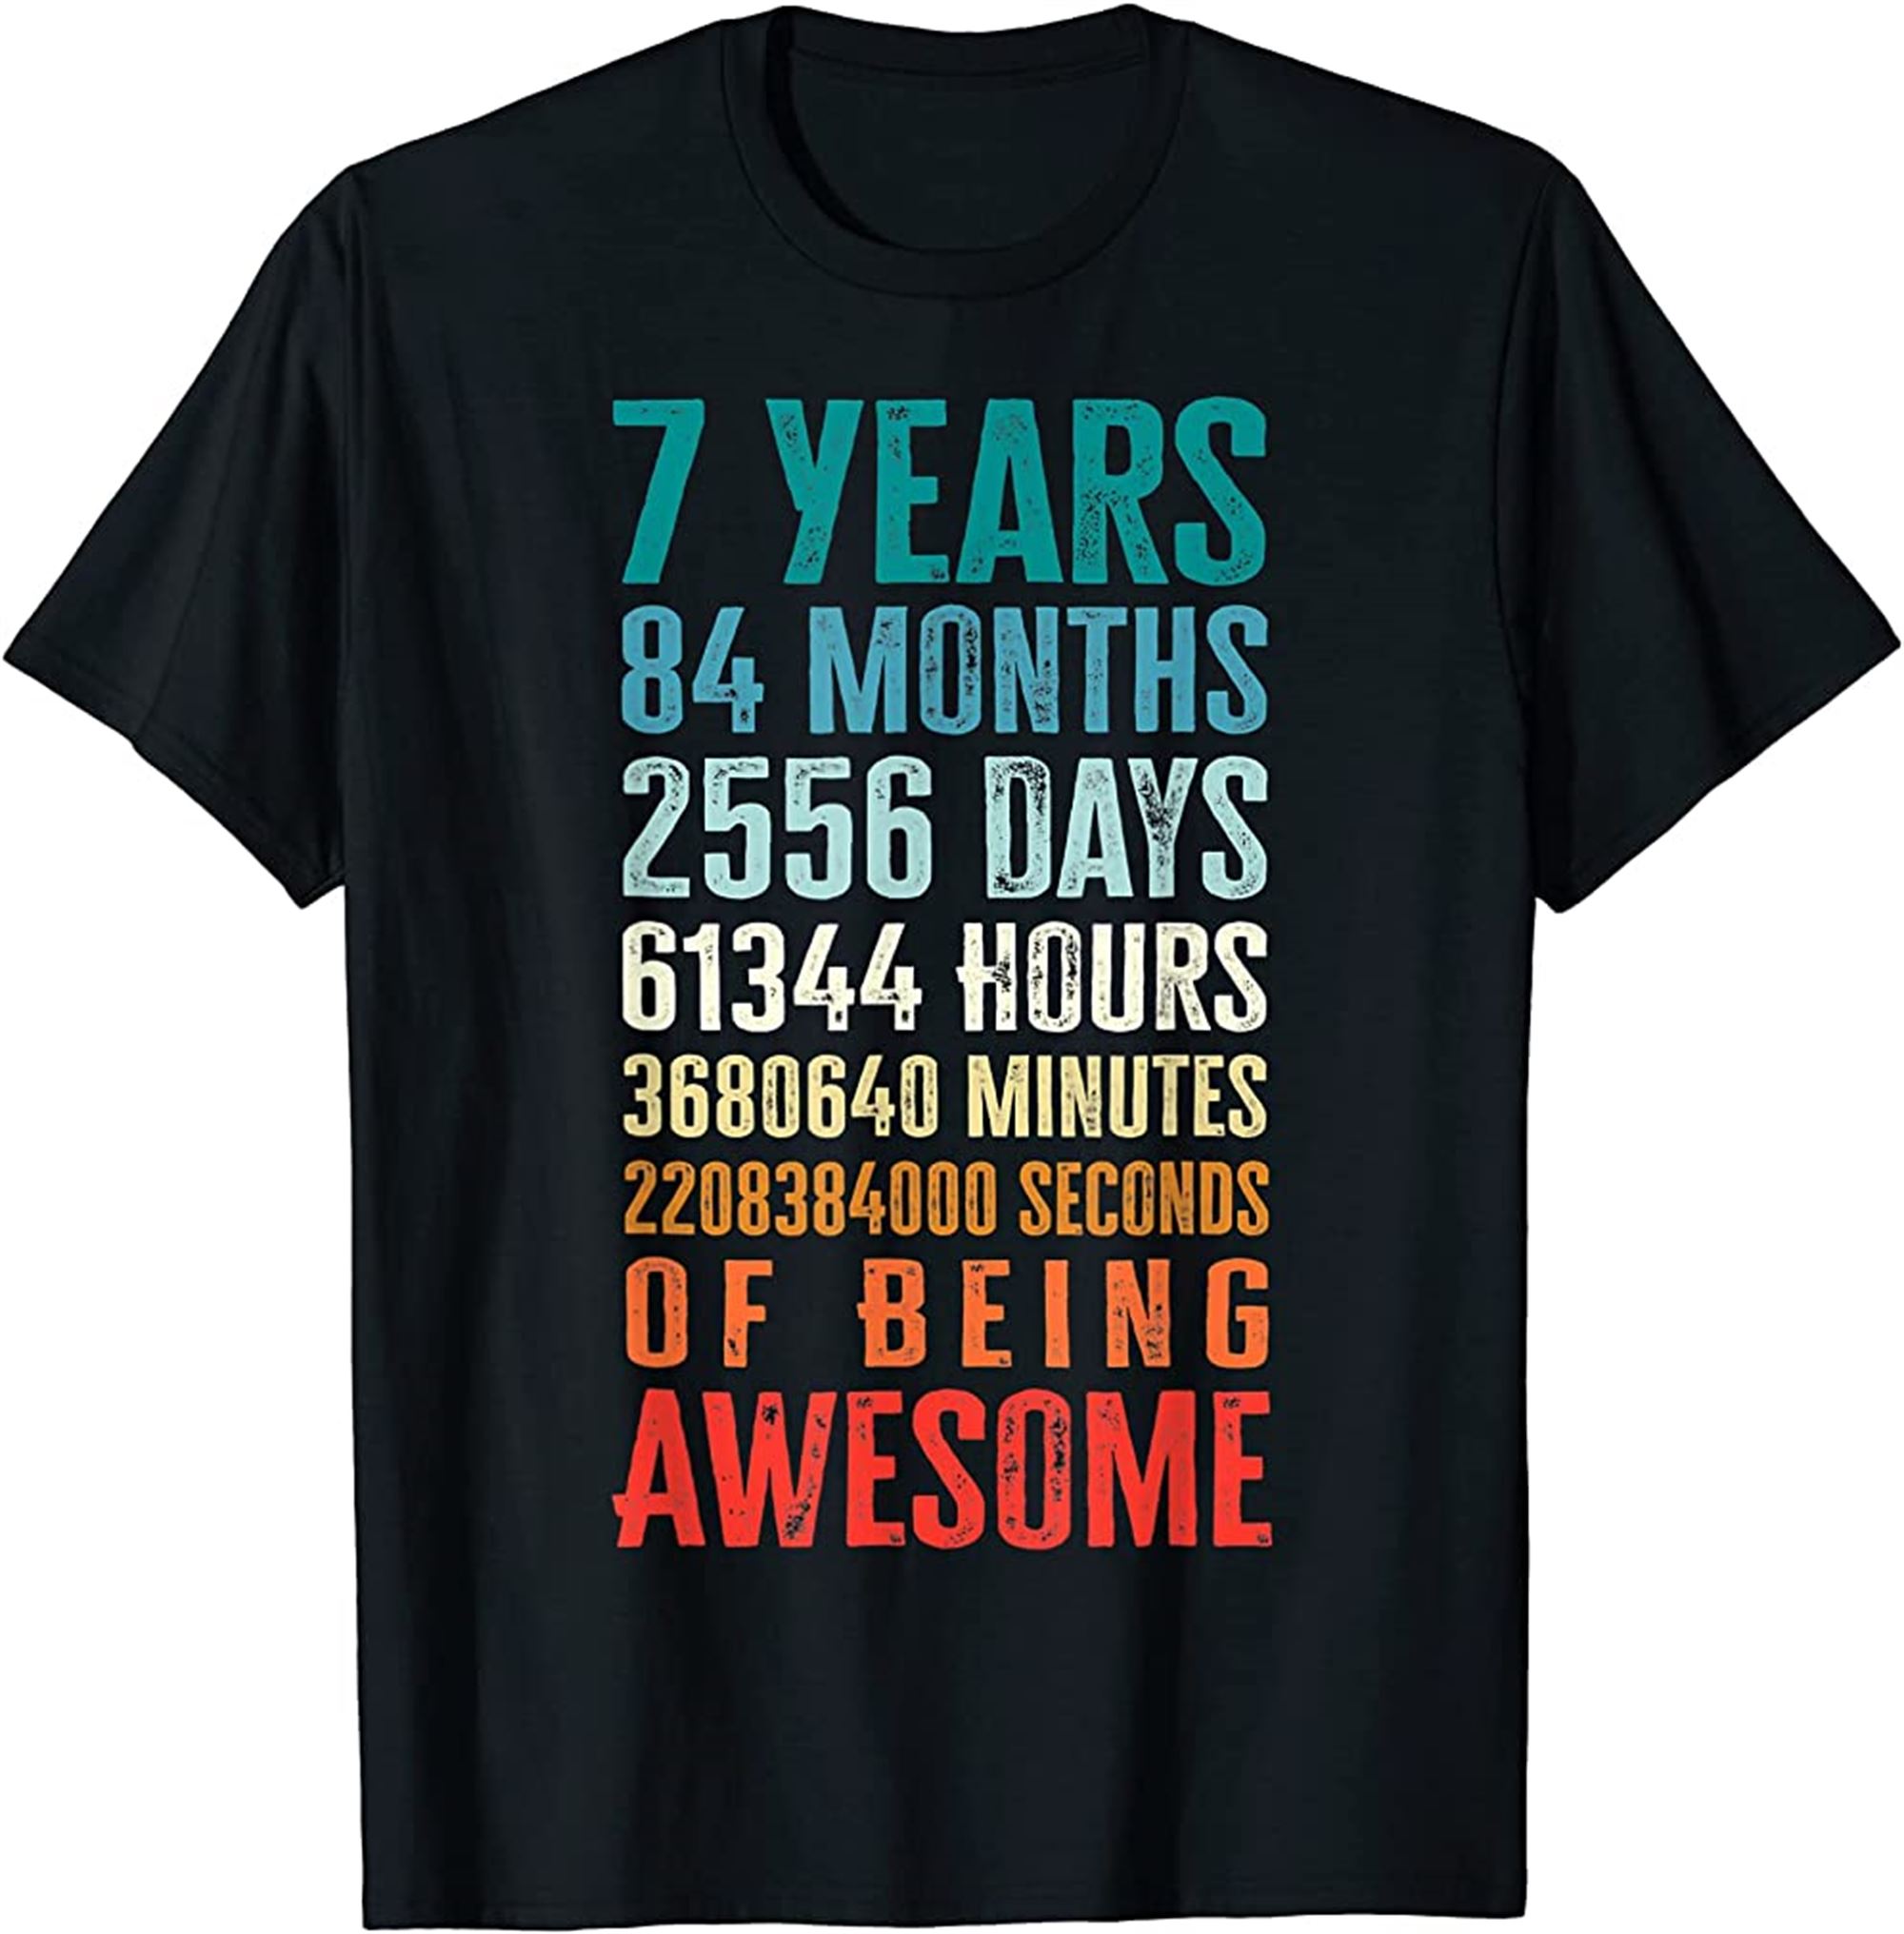 7 Years 84 Months Of Being Awesome Happy 7th Birthday T-shirt Full Size Up To 5xl